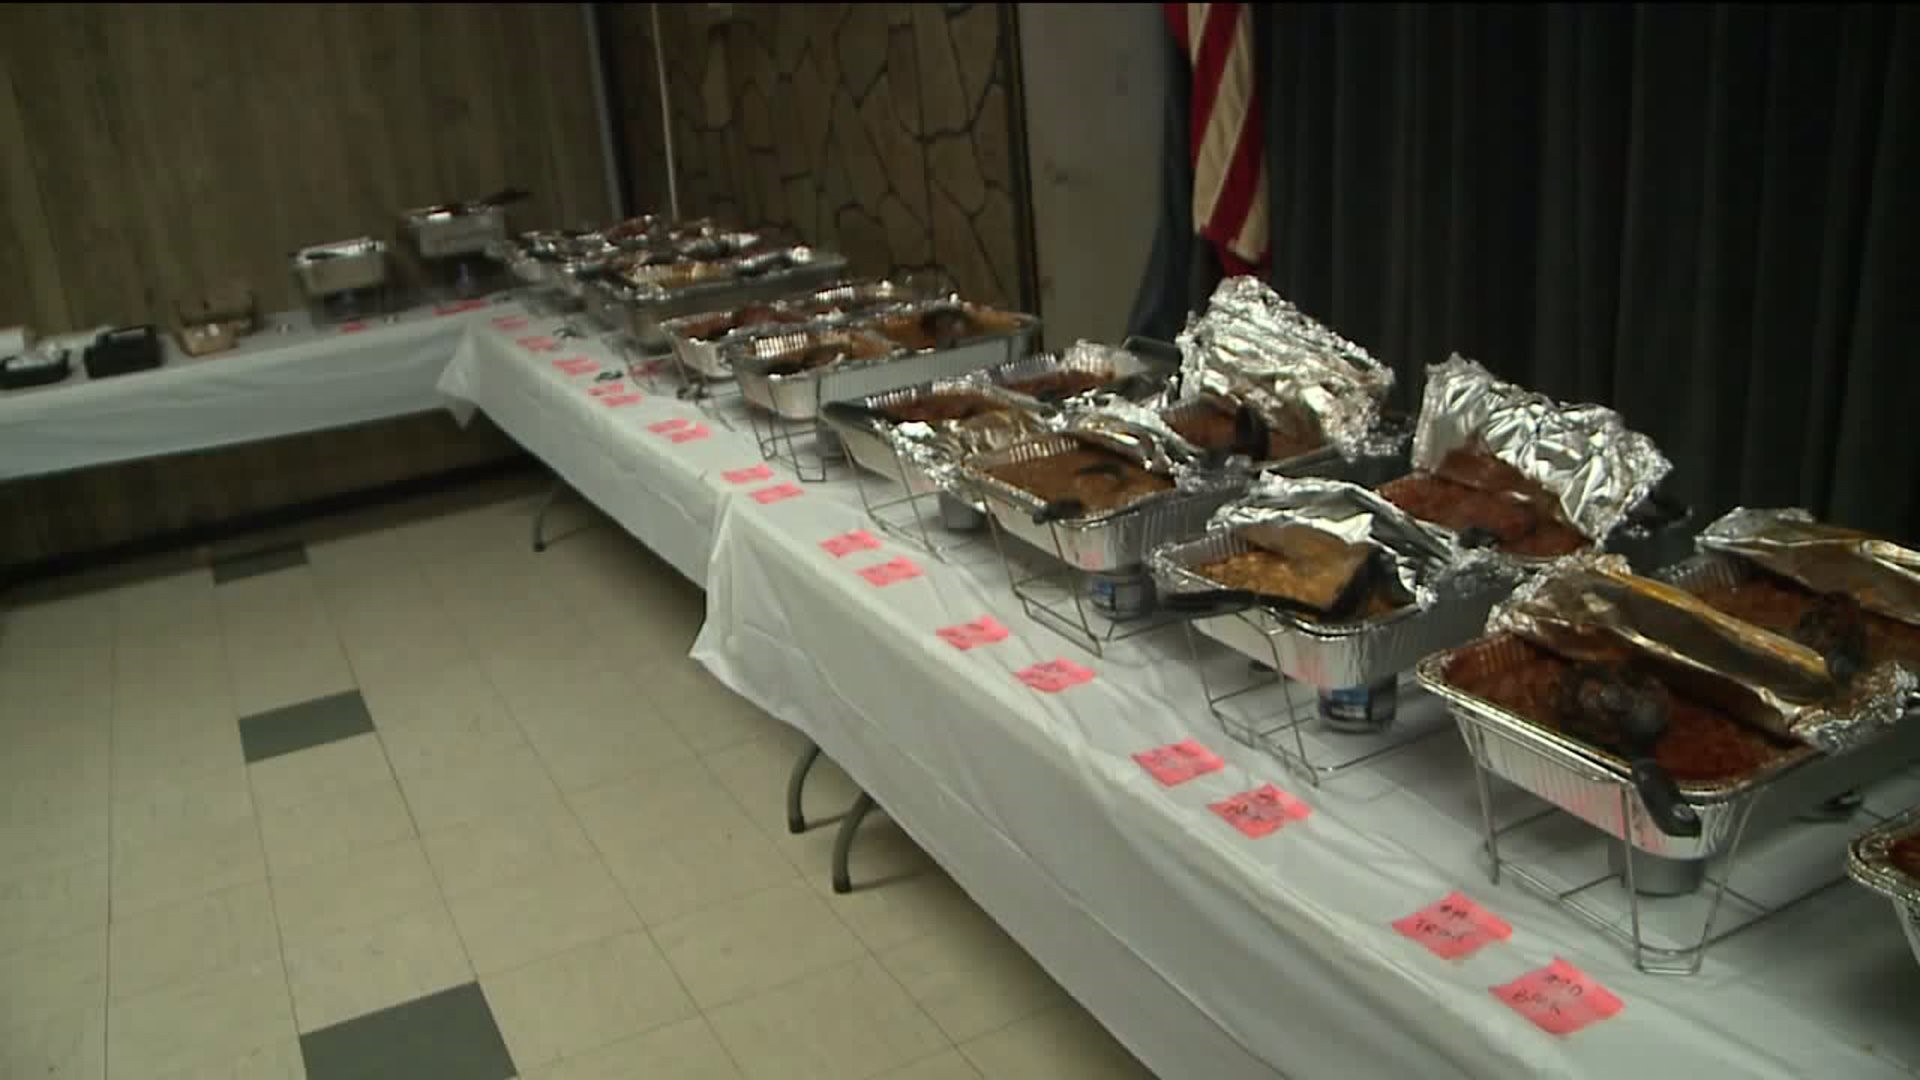 Annual Chili Cook-off Raises Money for Baby Girl with Health Problems